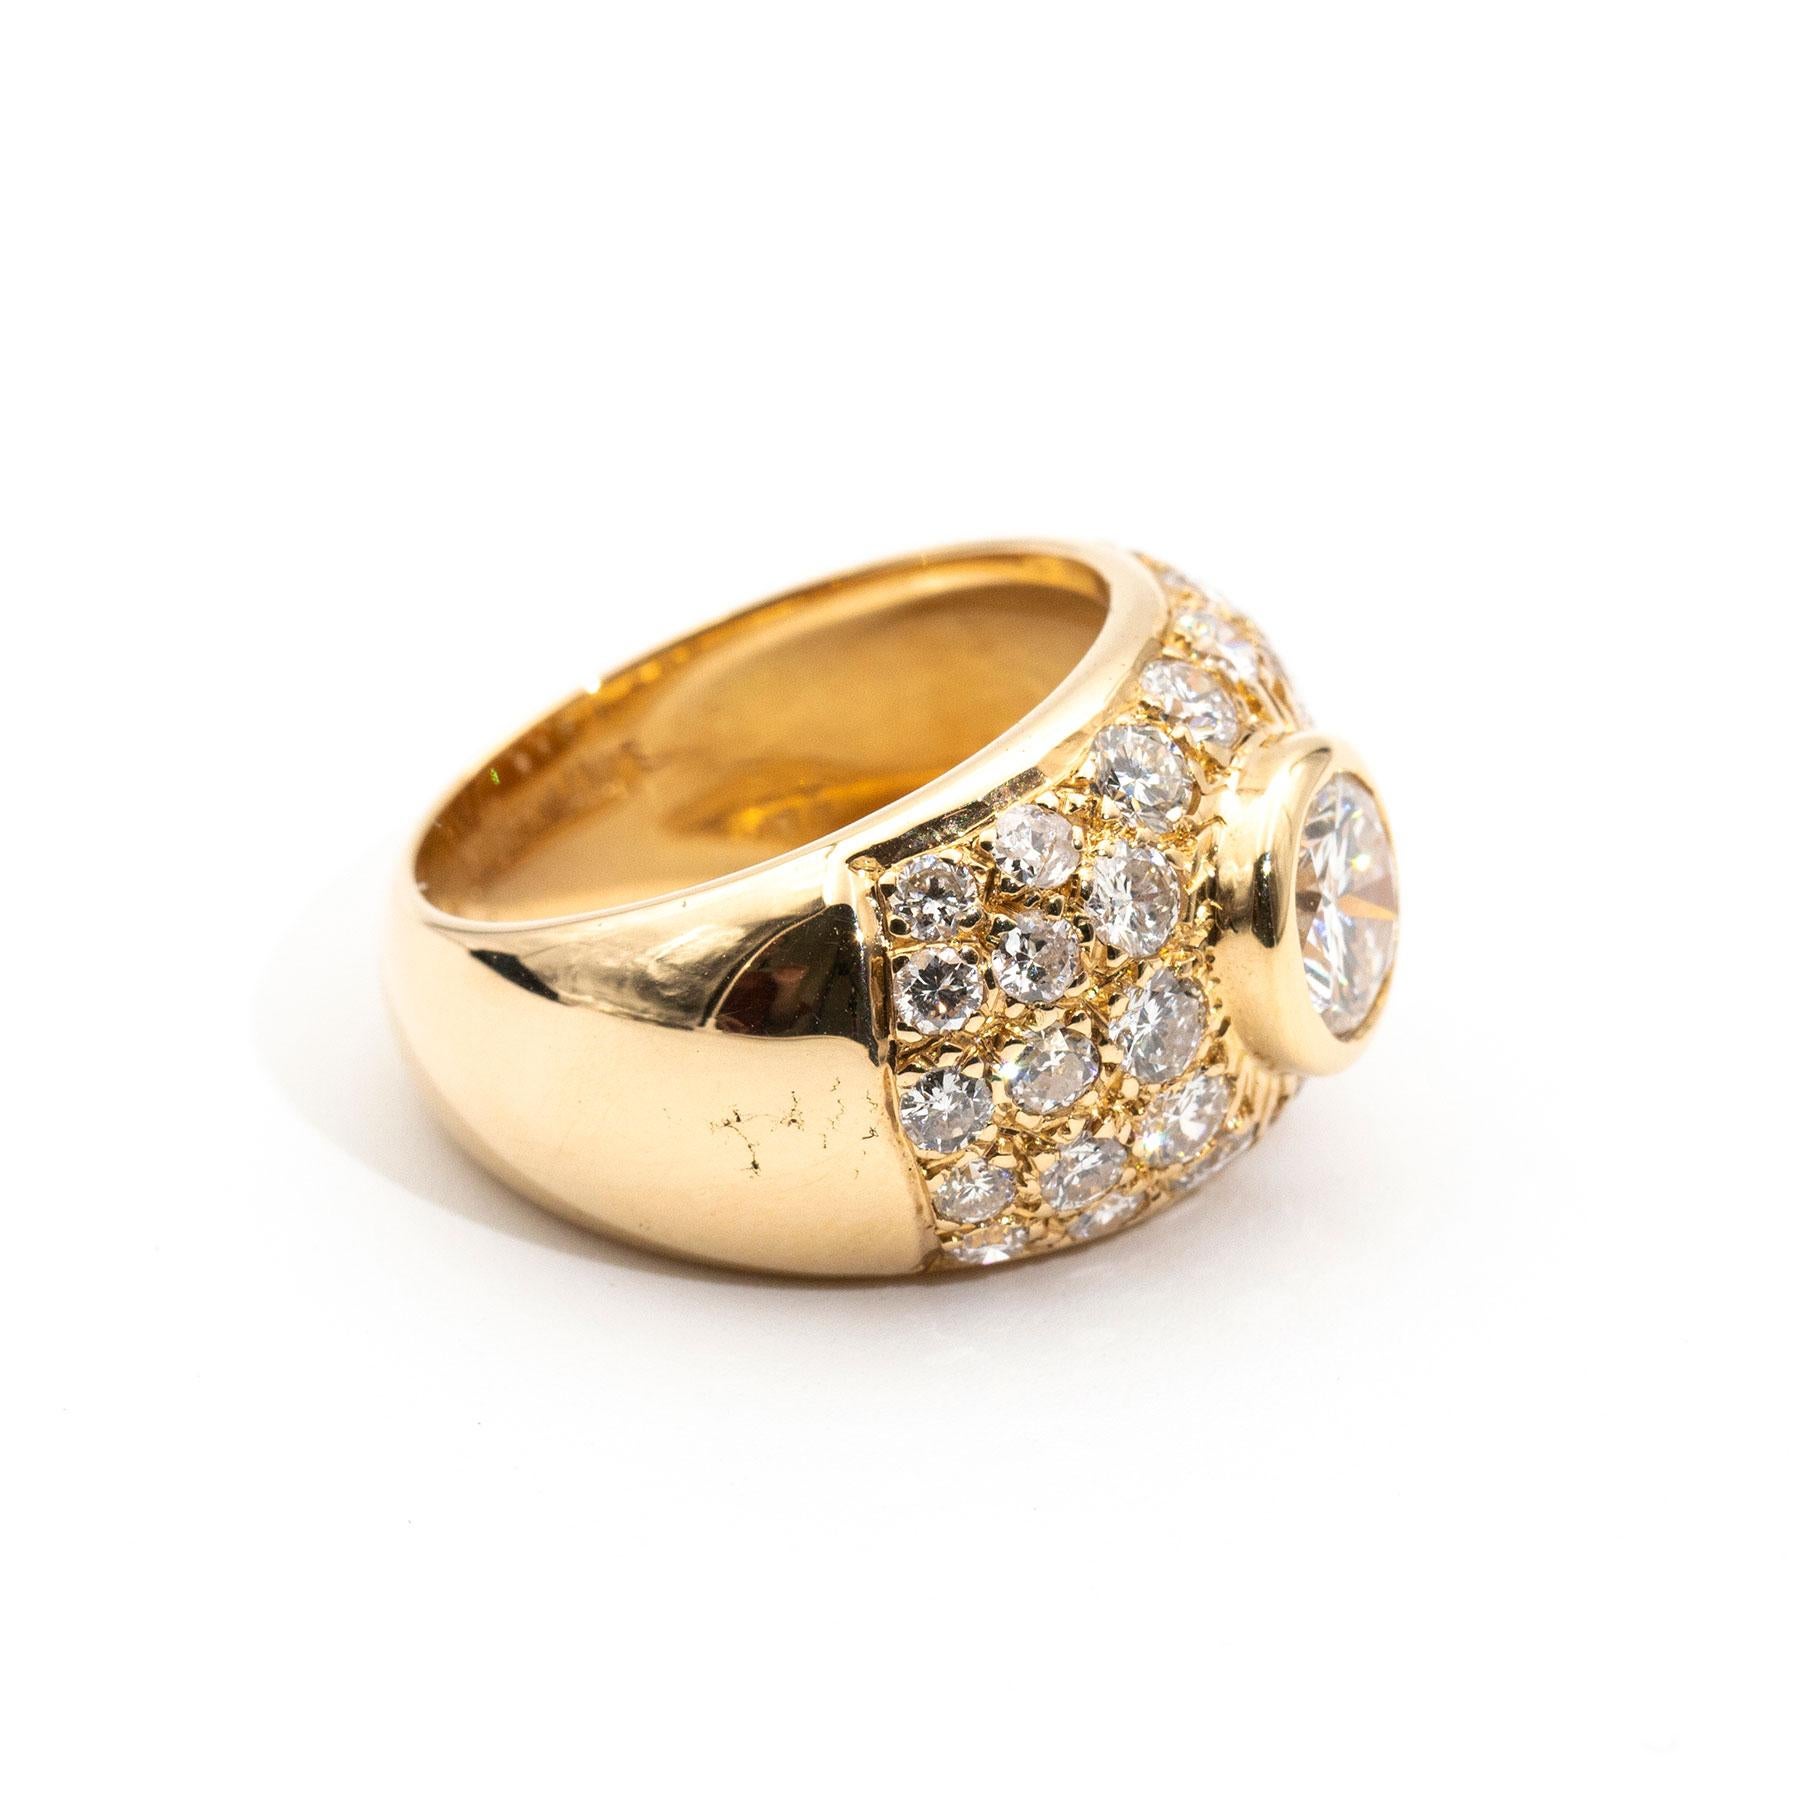 Masterfully forged in 18 carat yellow gold, this captivating vintage engagement ring is a sight to behold. A striking centrepiece 0.88 carat rub over round brilliant diamond rests in a frontal dome encrusted with a further 1.32 carats of shimmering